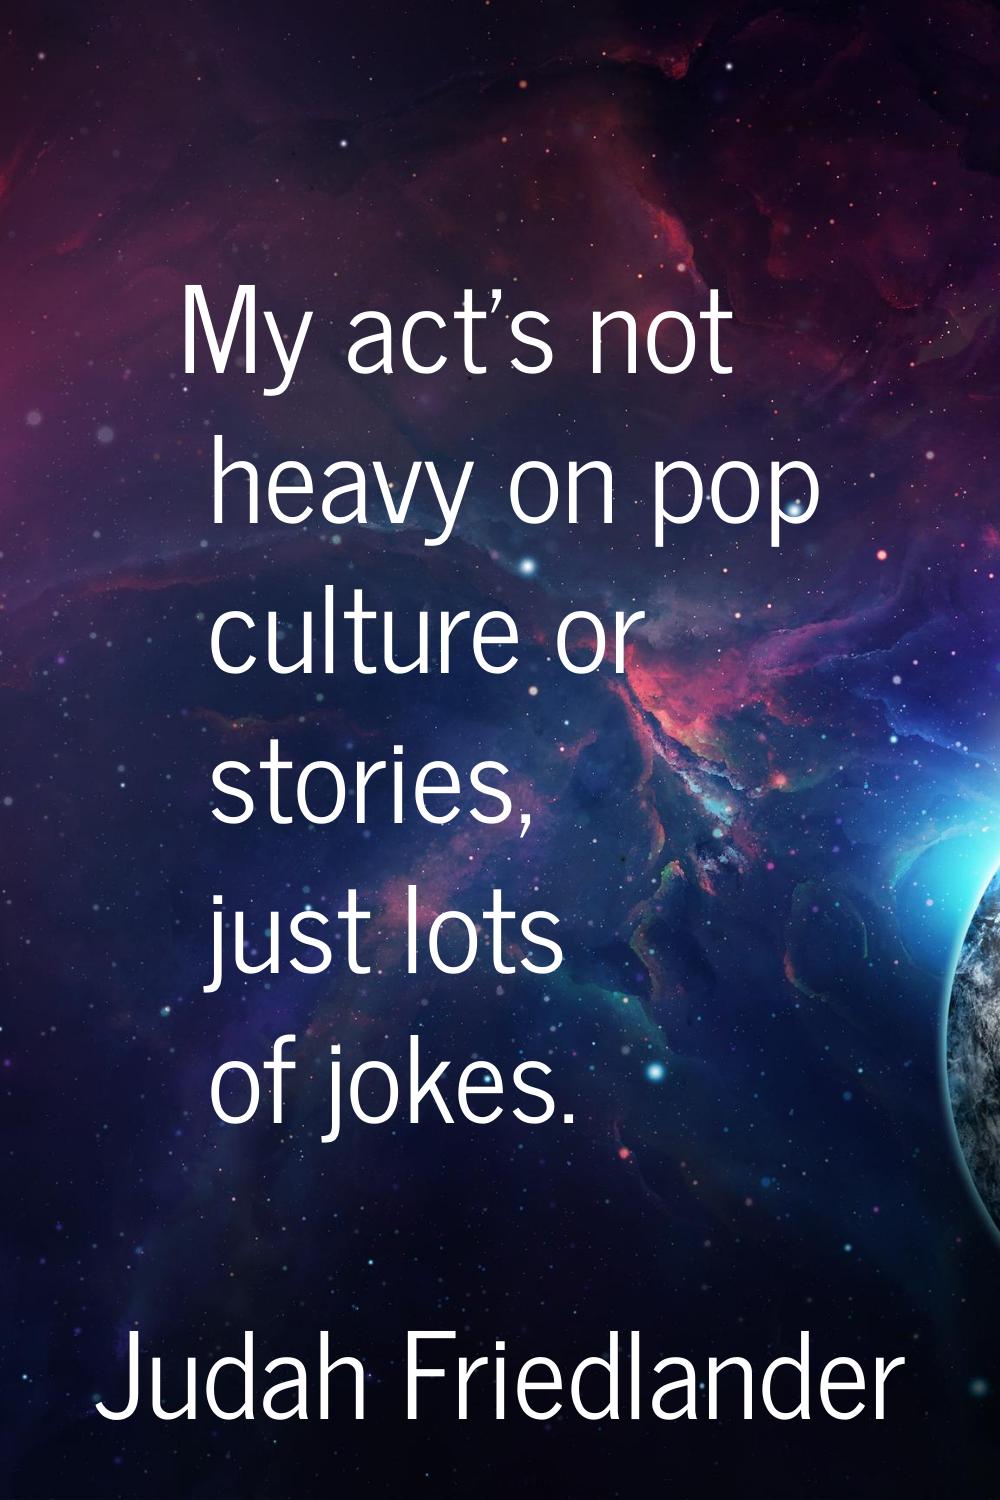 My act's not heavy on pop culture or stories, just lots of jokes.